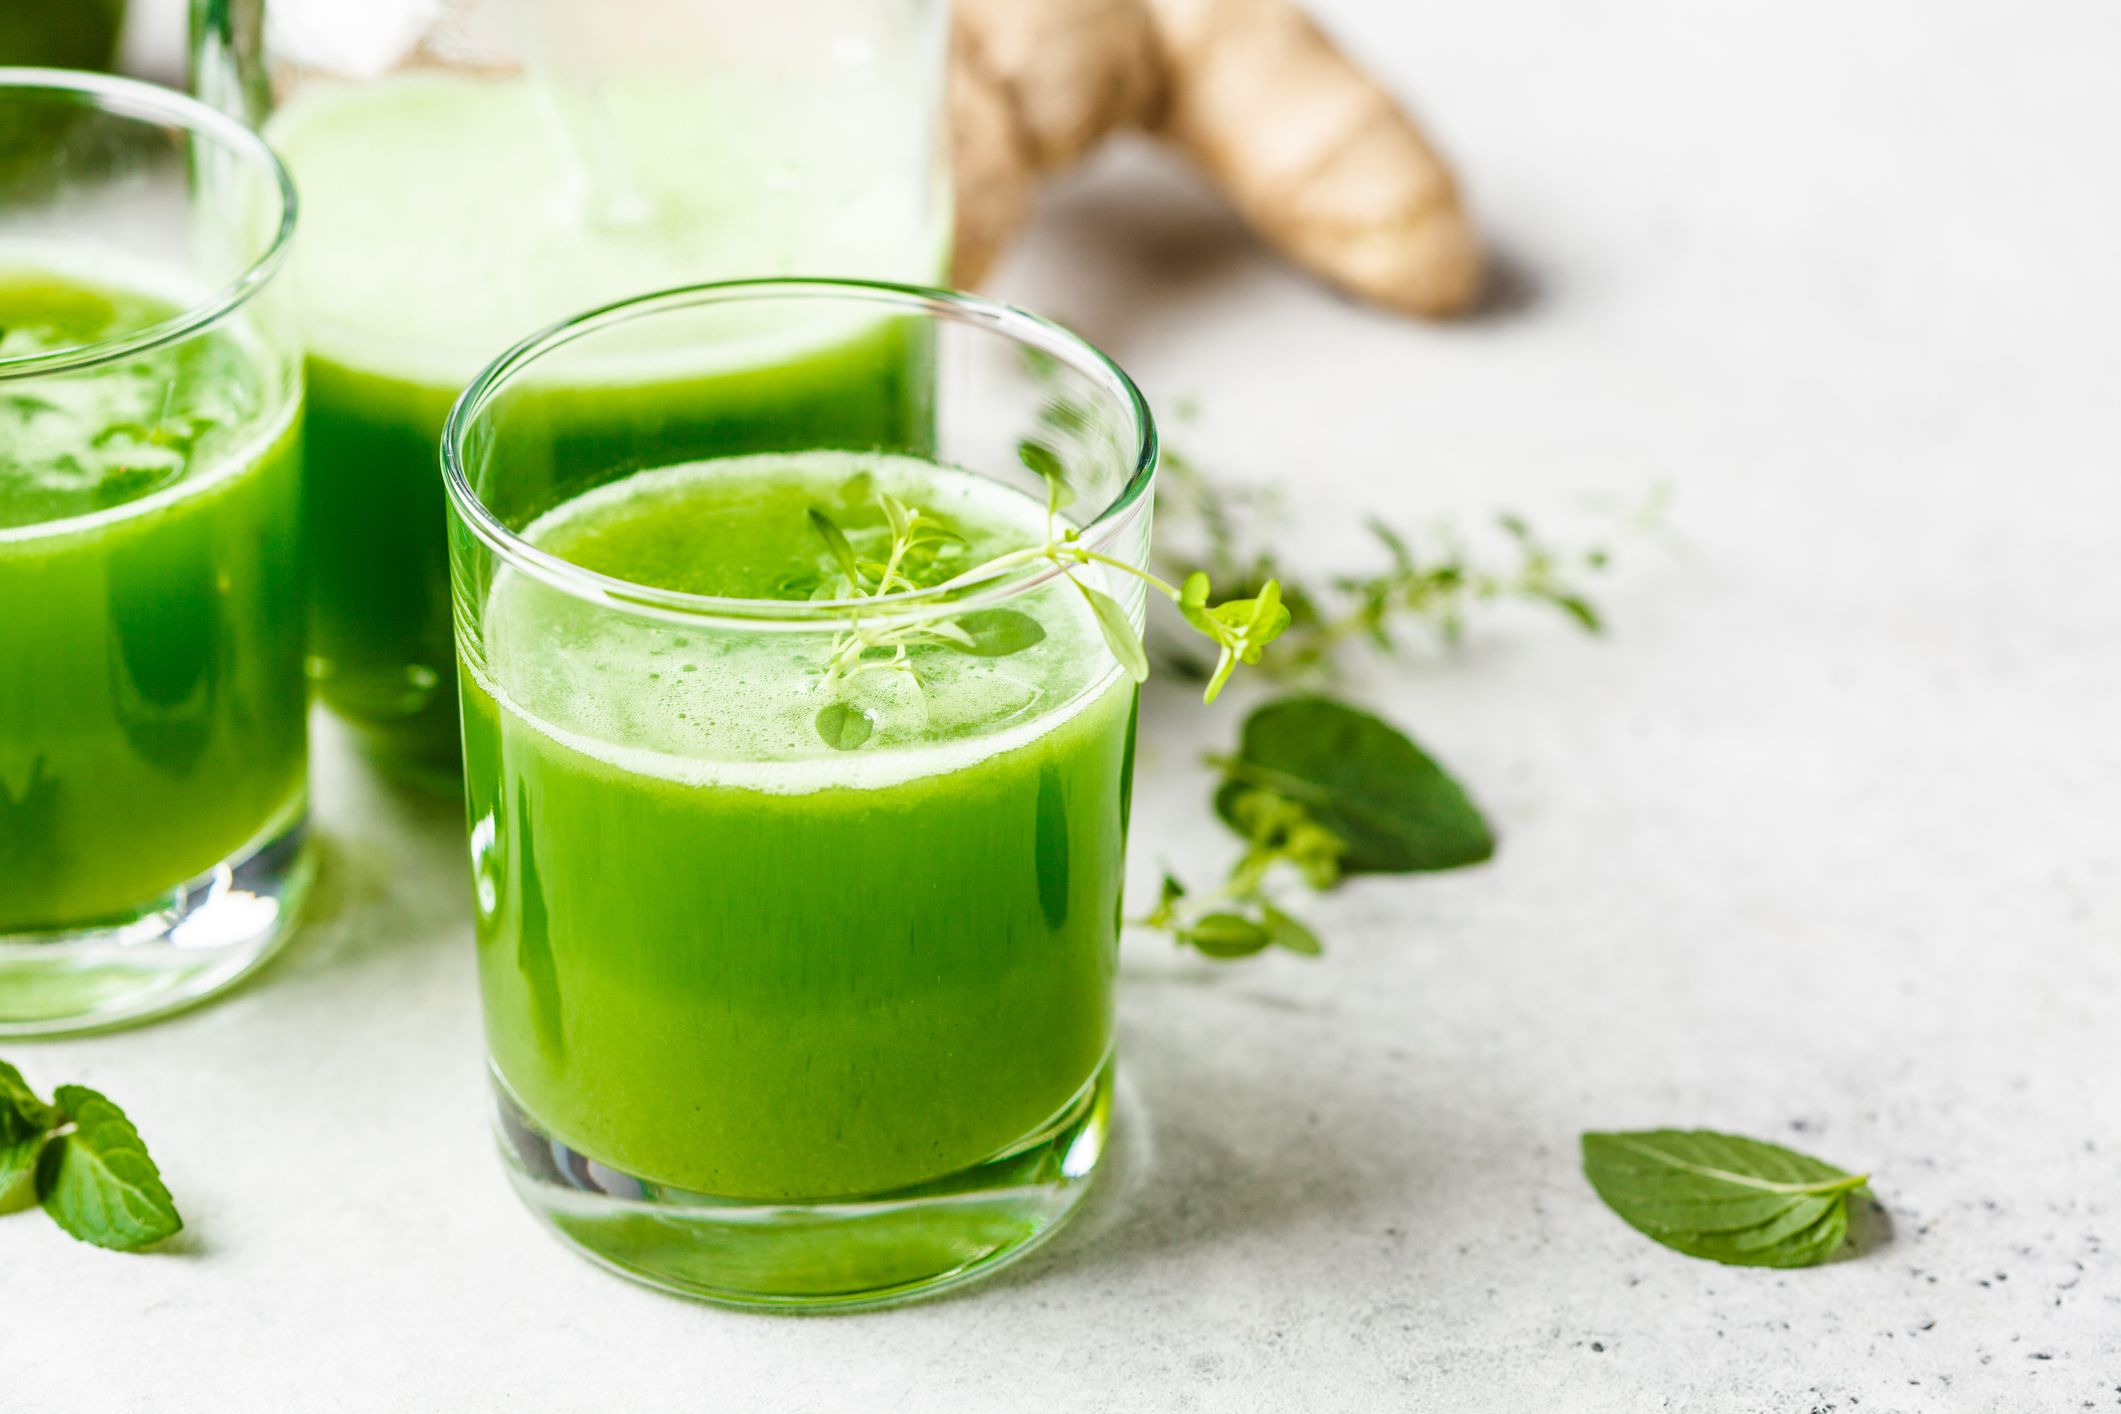 https://hips.hearstapps.com/hmg-prod/images/green-detox-juice-with-ginger-and-mint-in-glasses-royalty-free-image-1590670270.jpg